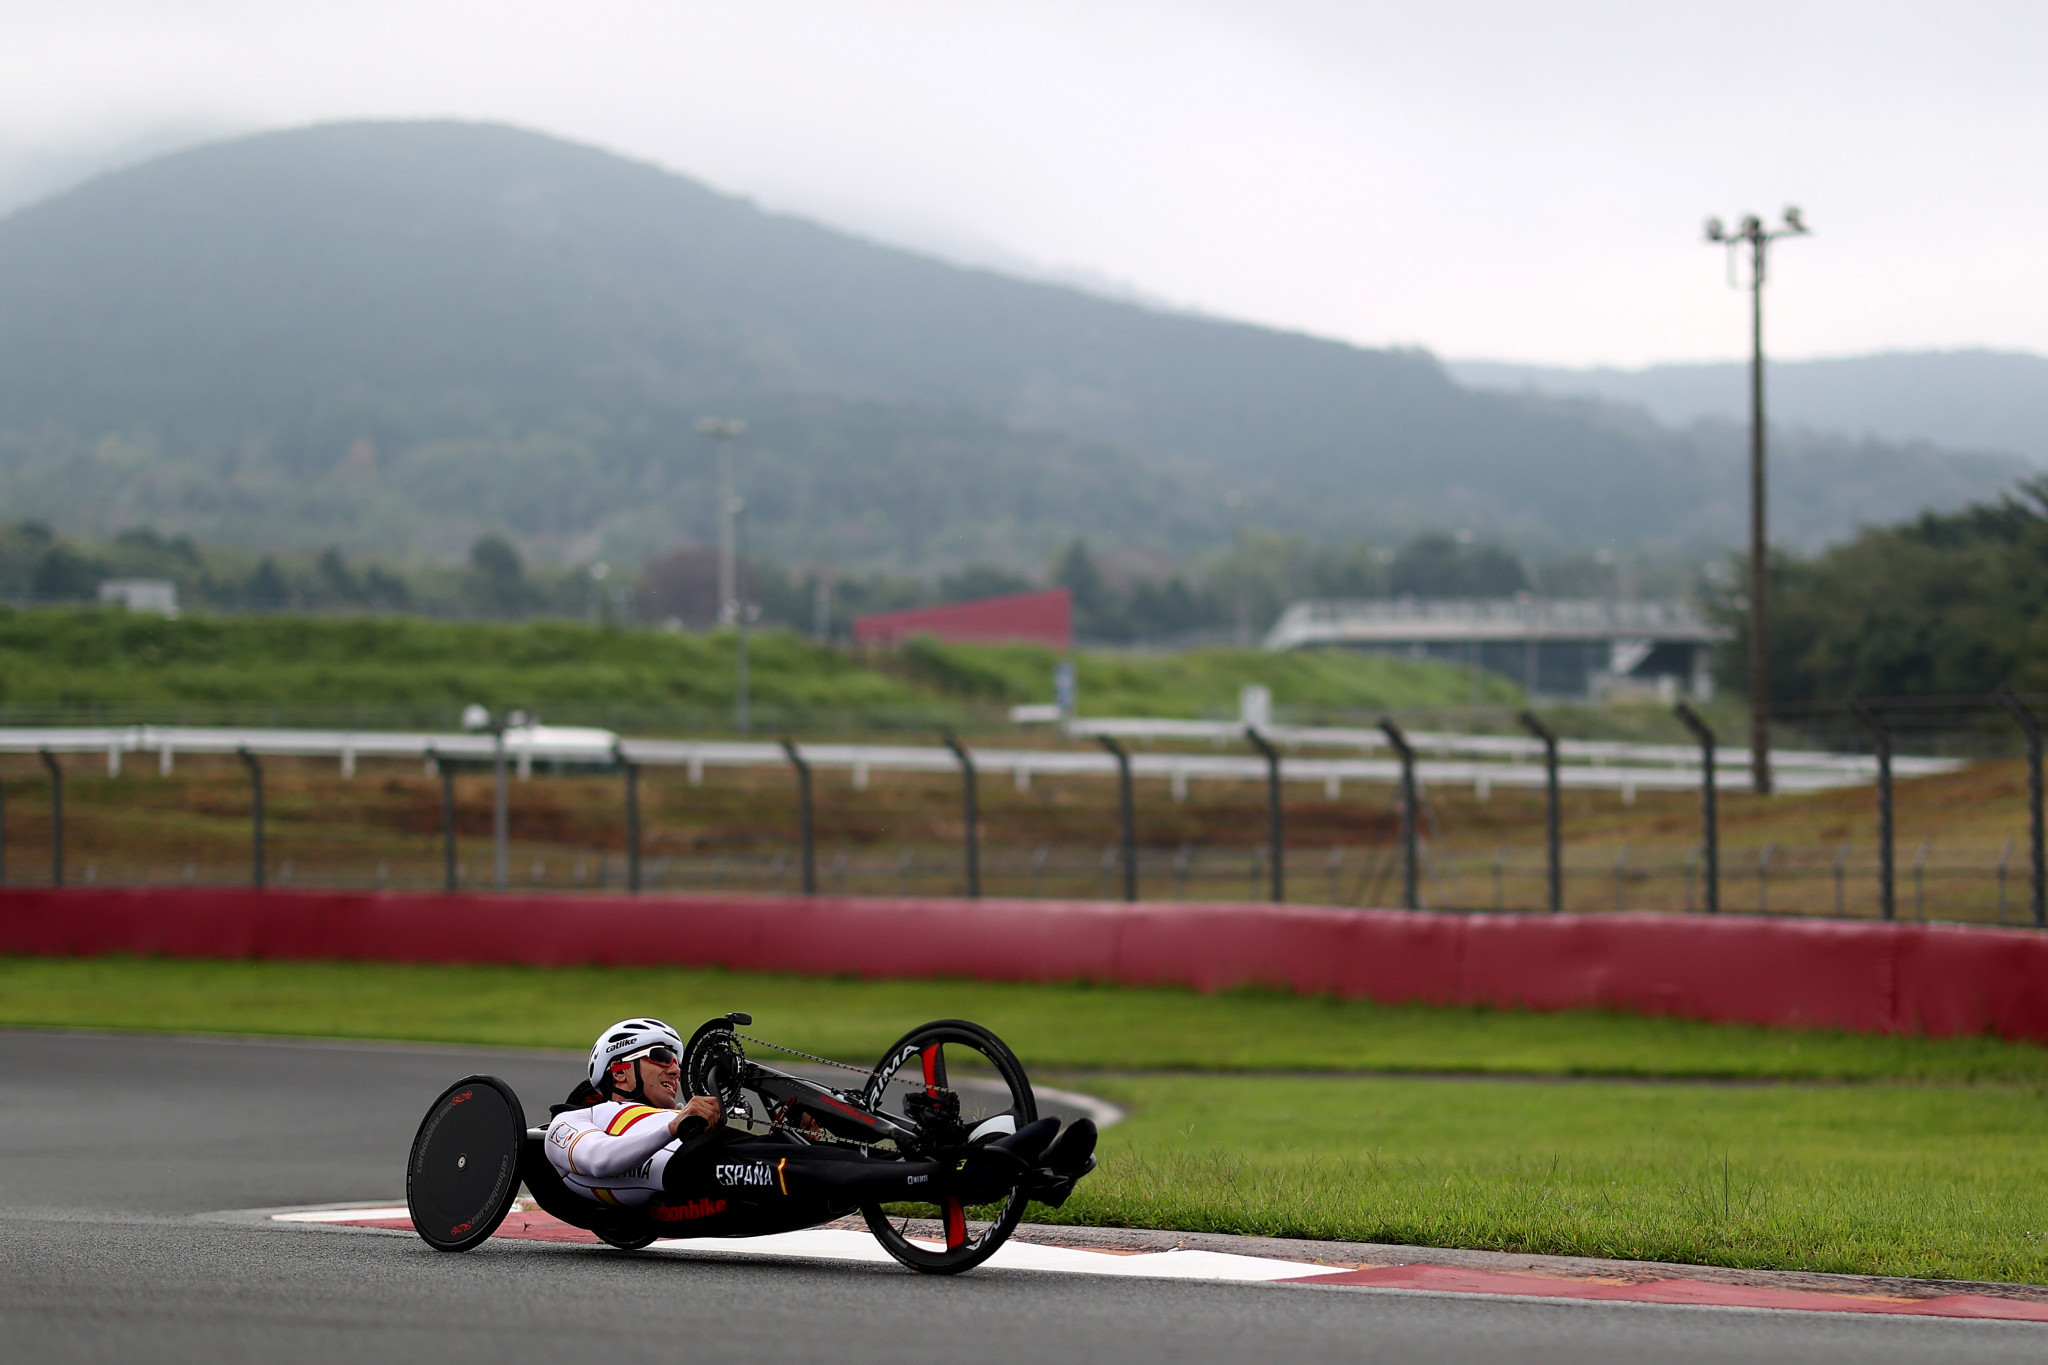 Fuji International Speedway provided the location where 19 time trial events took place ©Getty Images